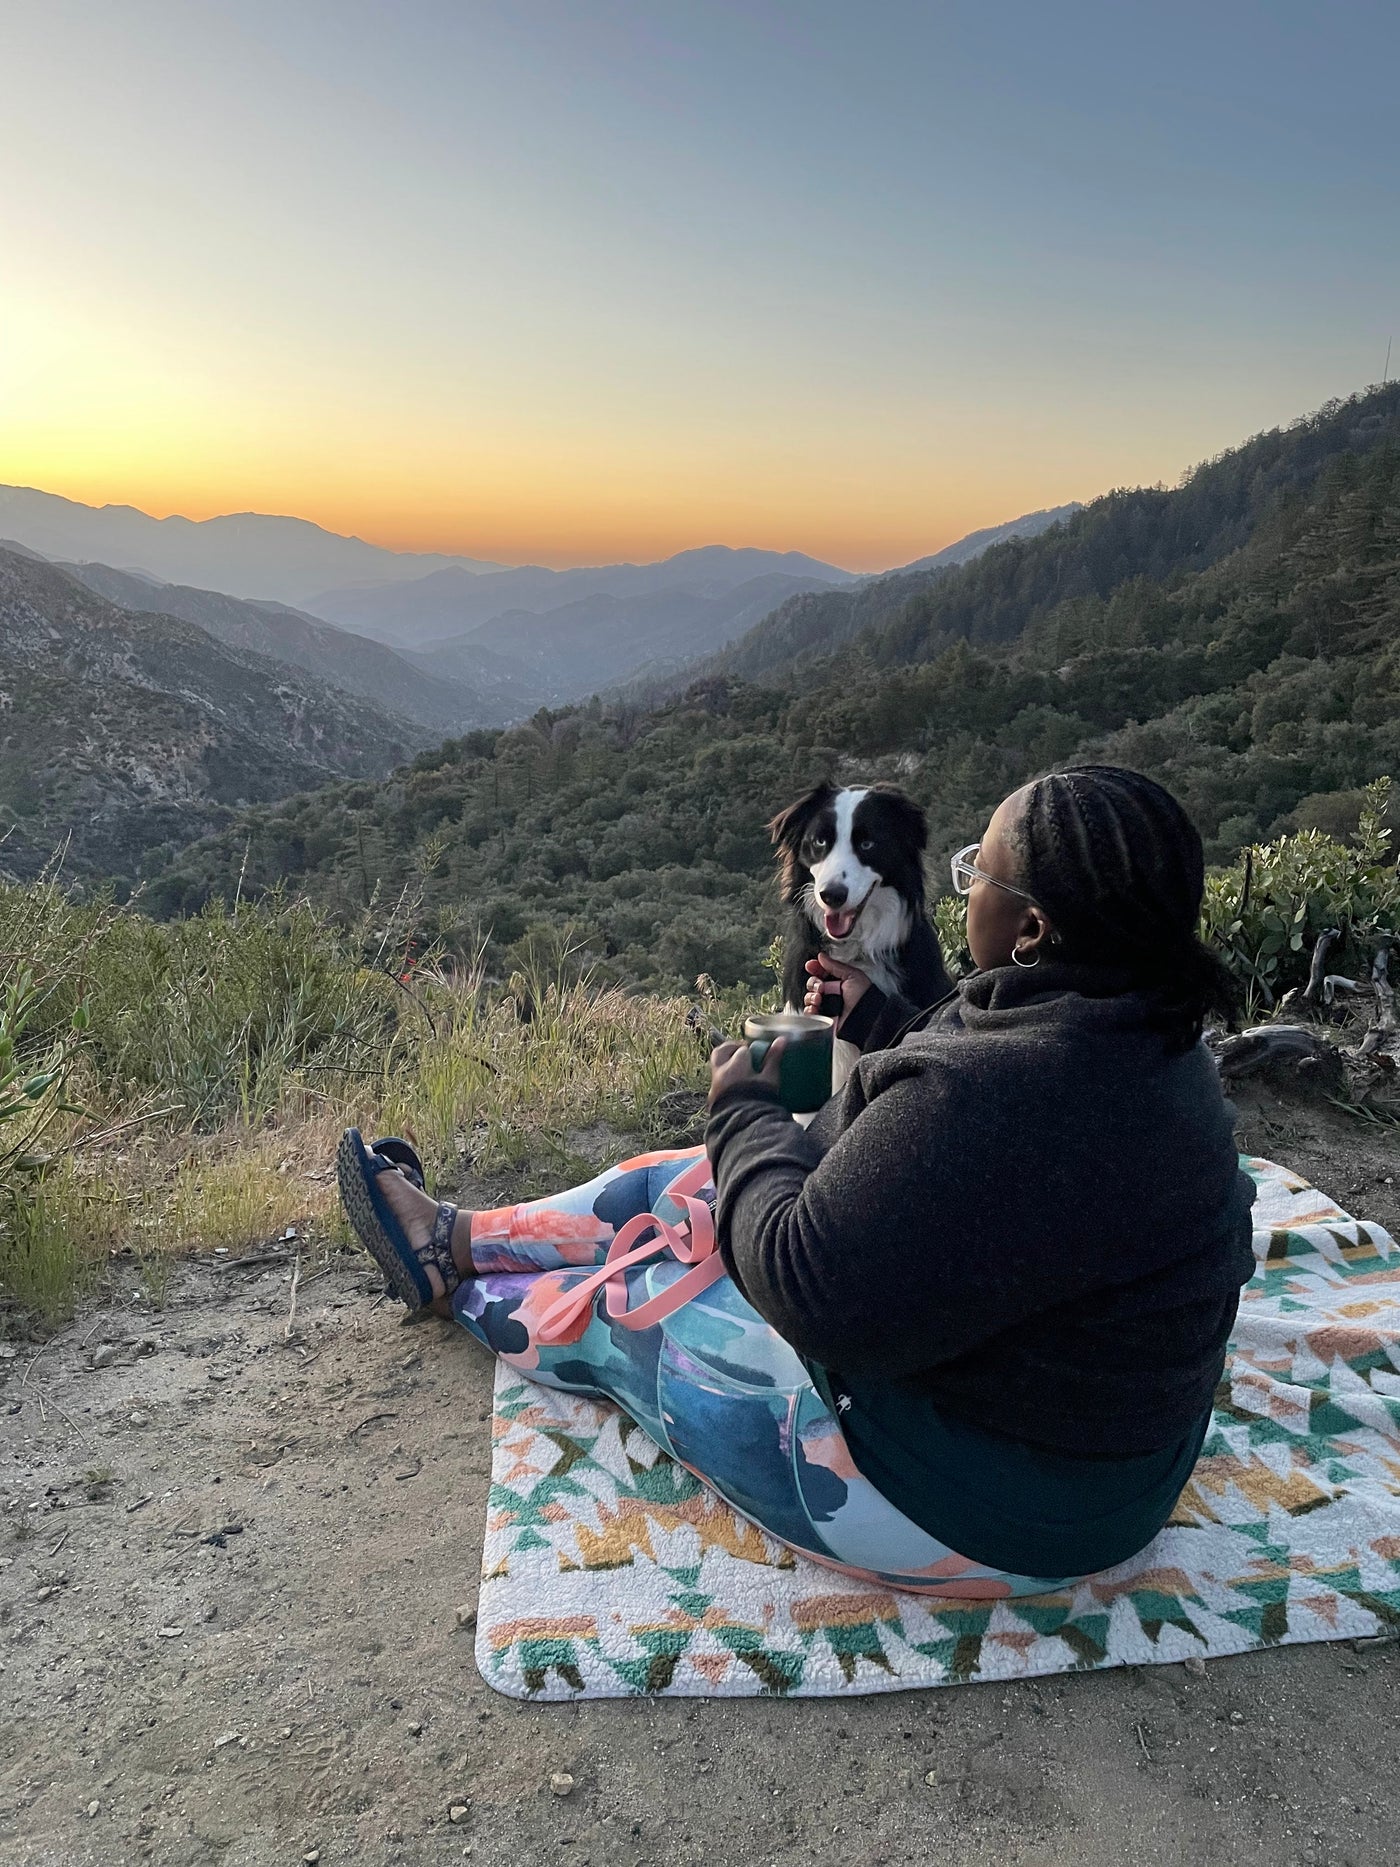 How to Microadventure with Your Dog